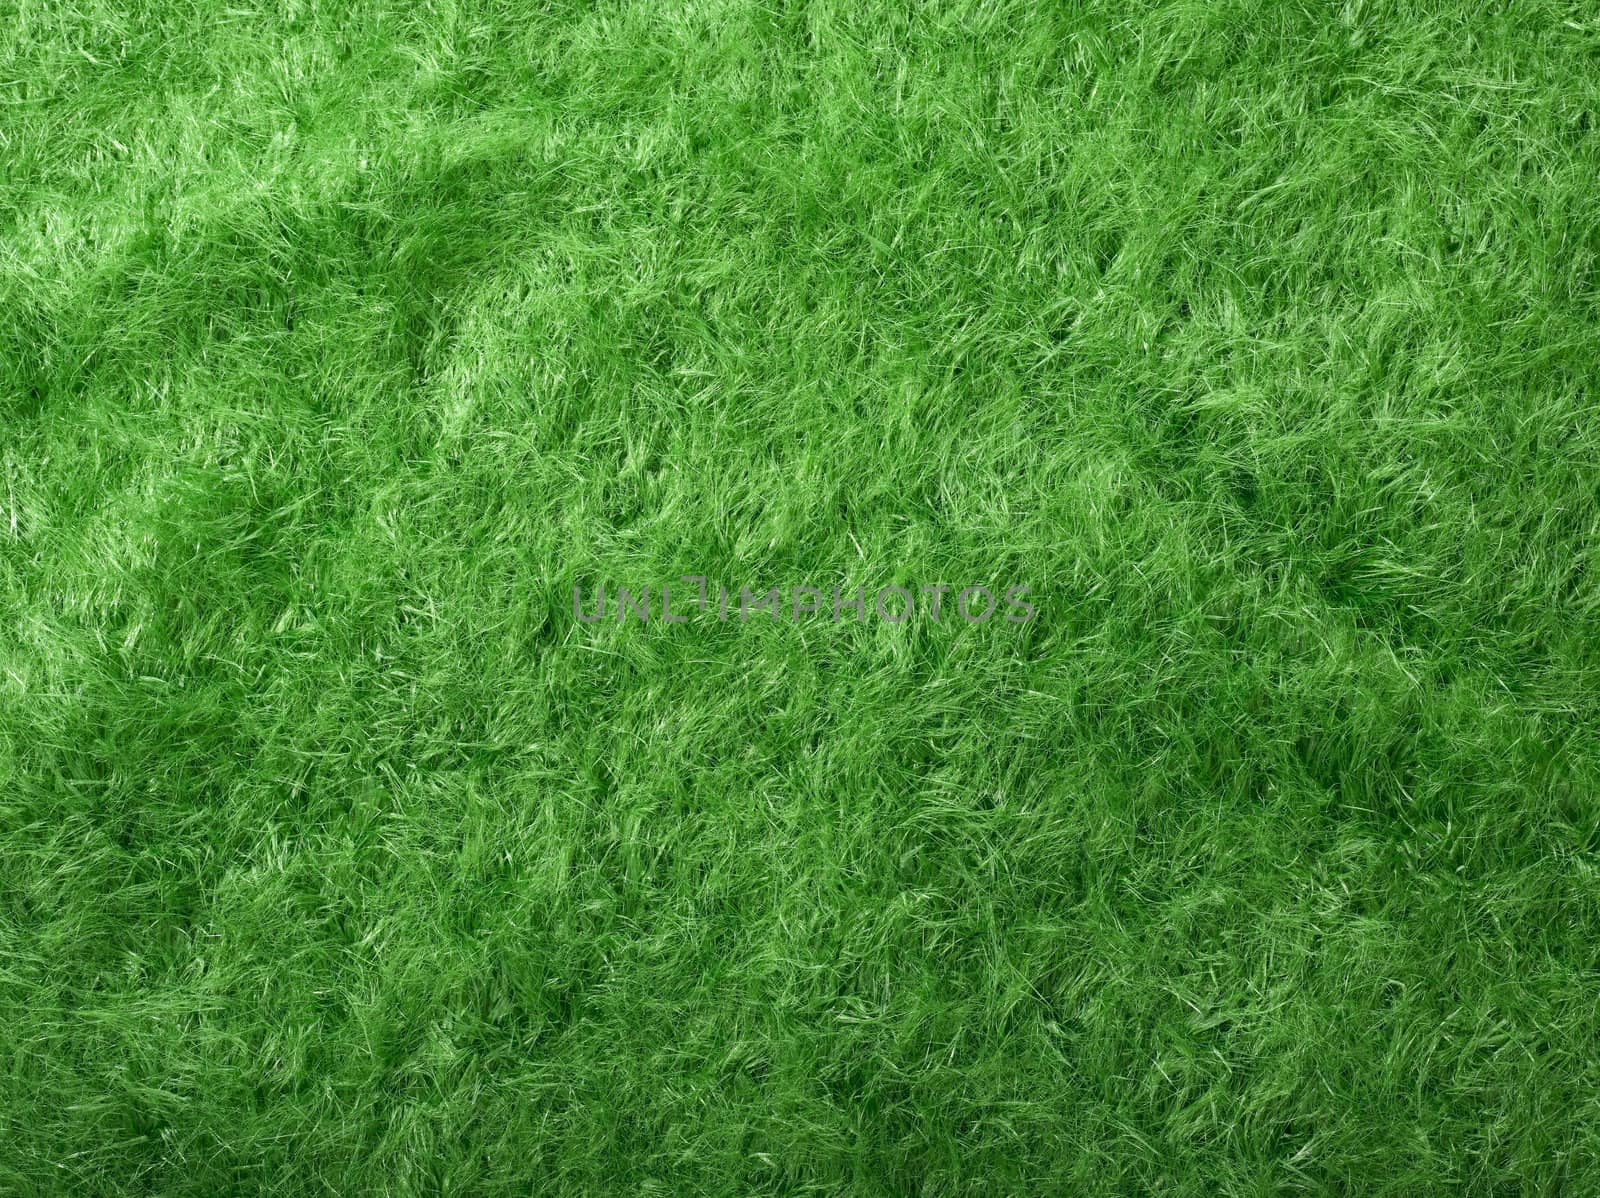 Textured fake grass for background